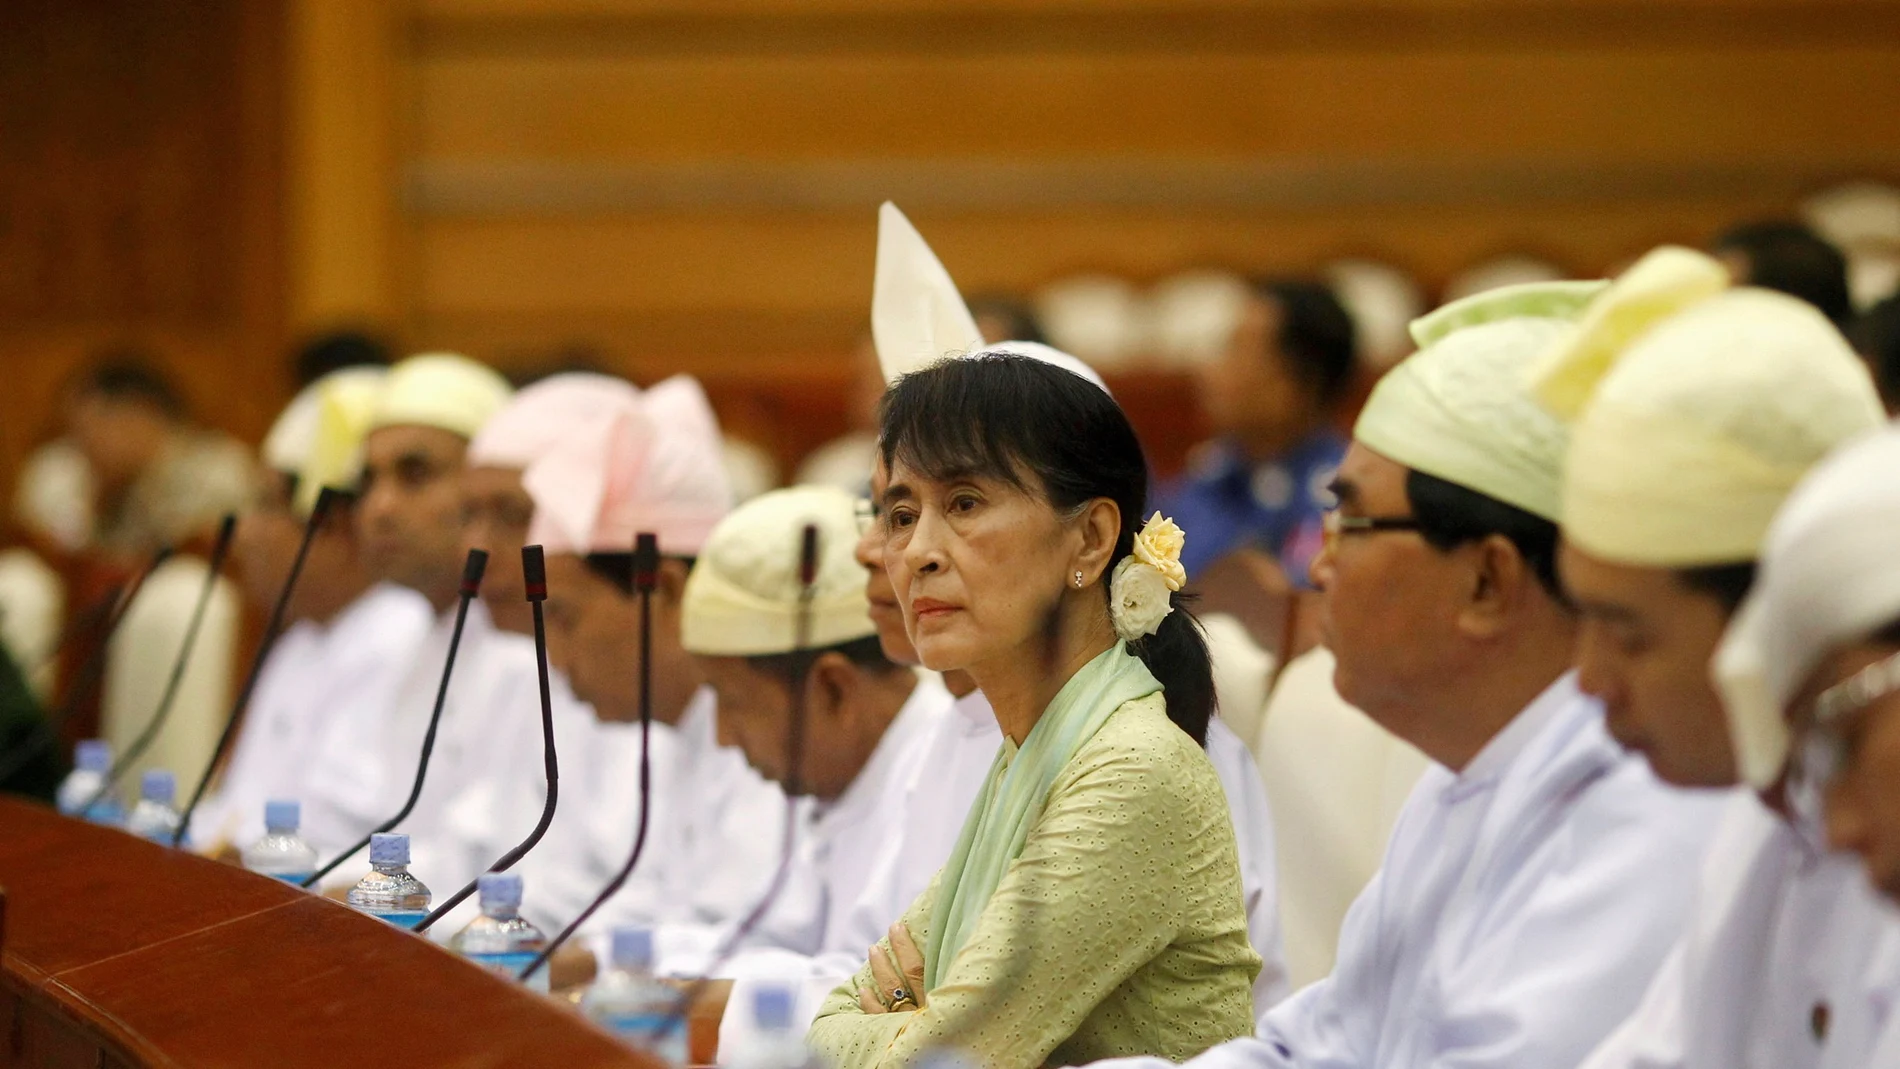 FILE PHOTO: Myanmar pro-democracy leader Aung San Suu Kyi (C) attends a parliamentary meeting at the Lower House of Parliament in Naypyitaw July 9, 2012. REUTERS/Soe Zeya Tun/File Photo/File Photo